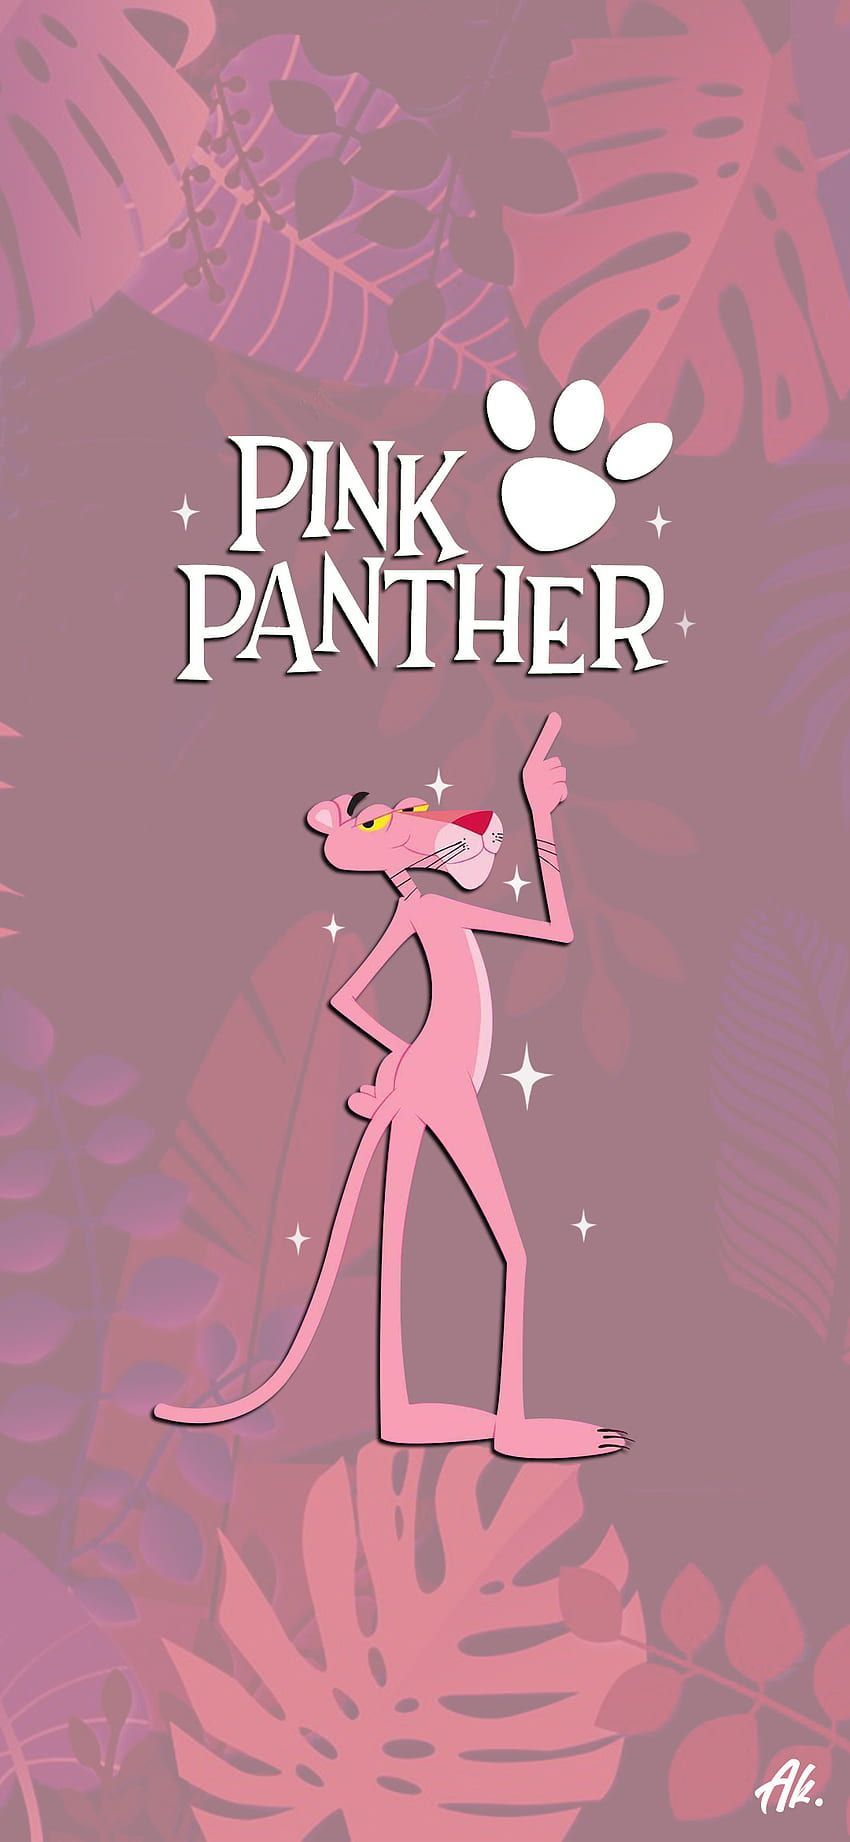 The pink panther HD wallpaper